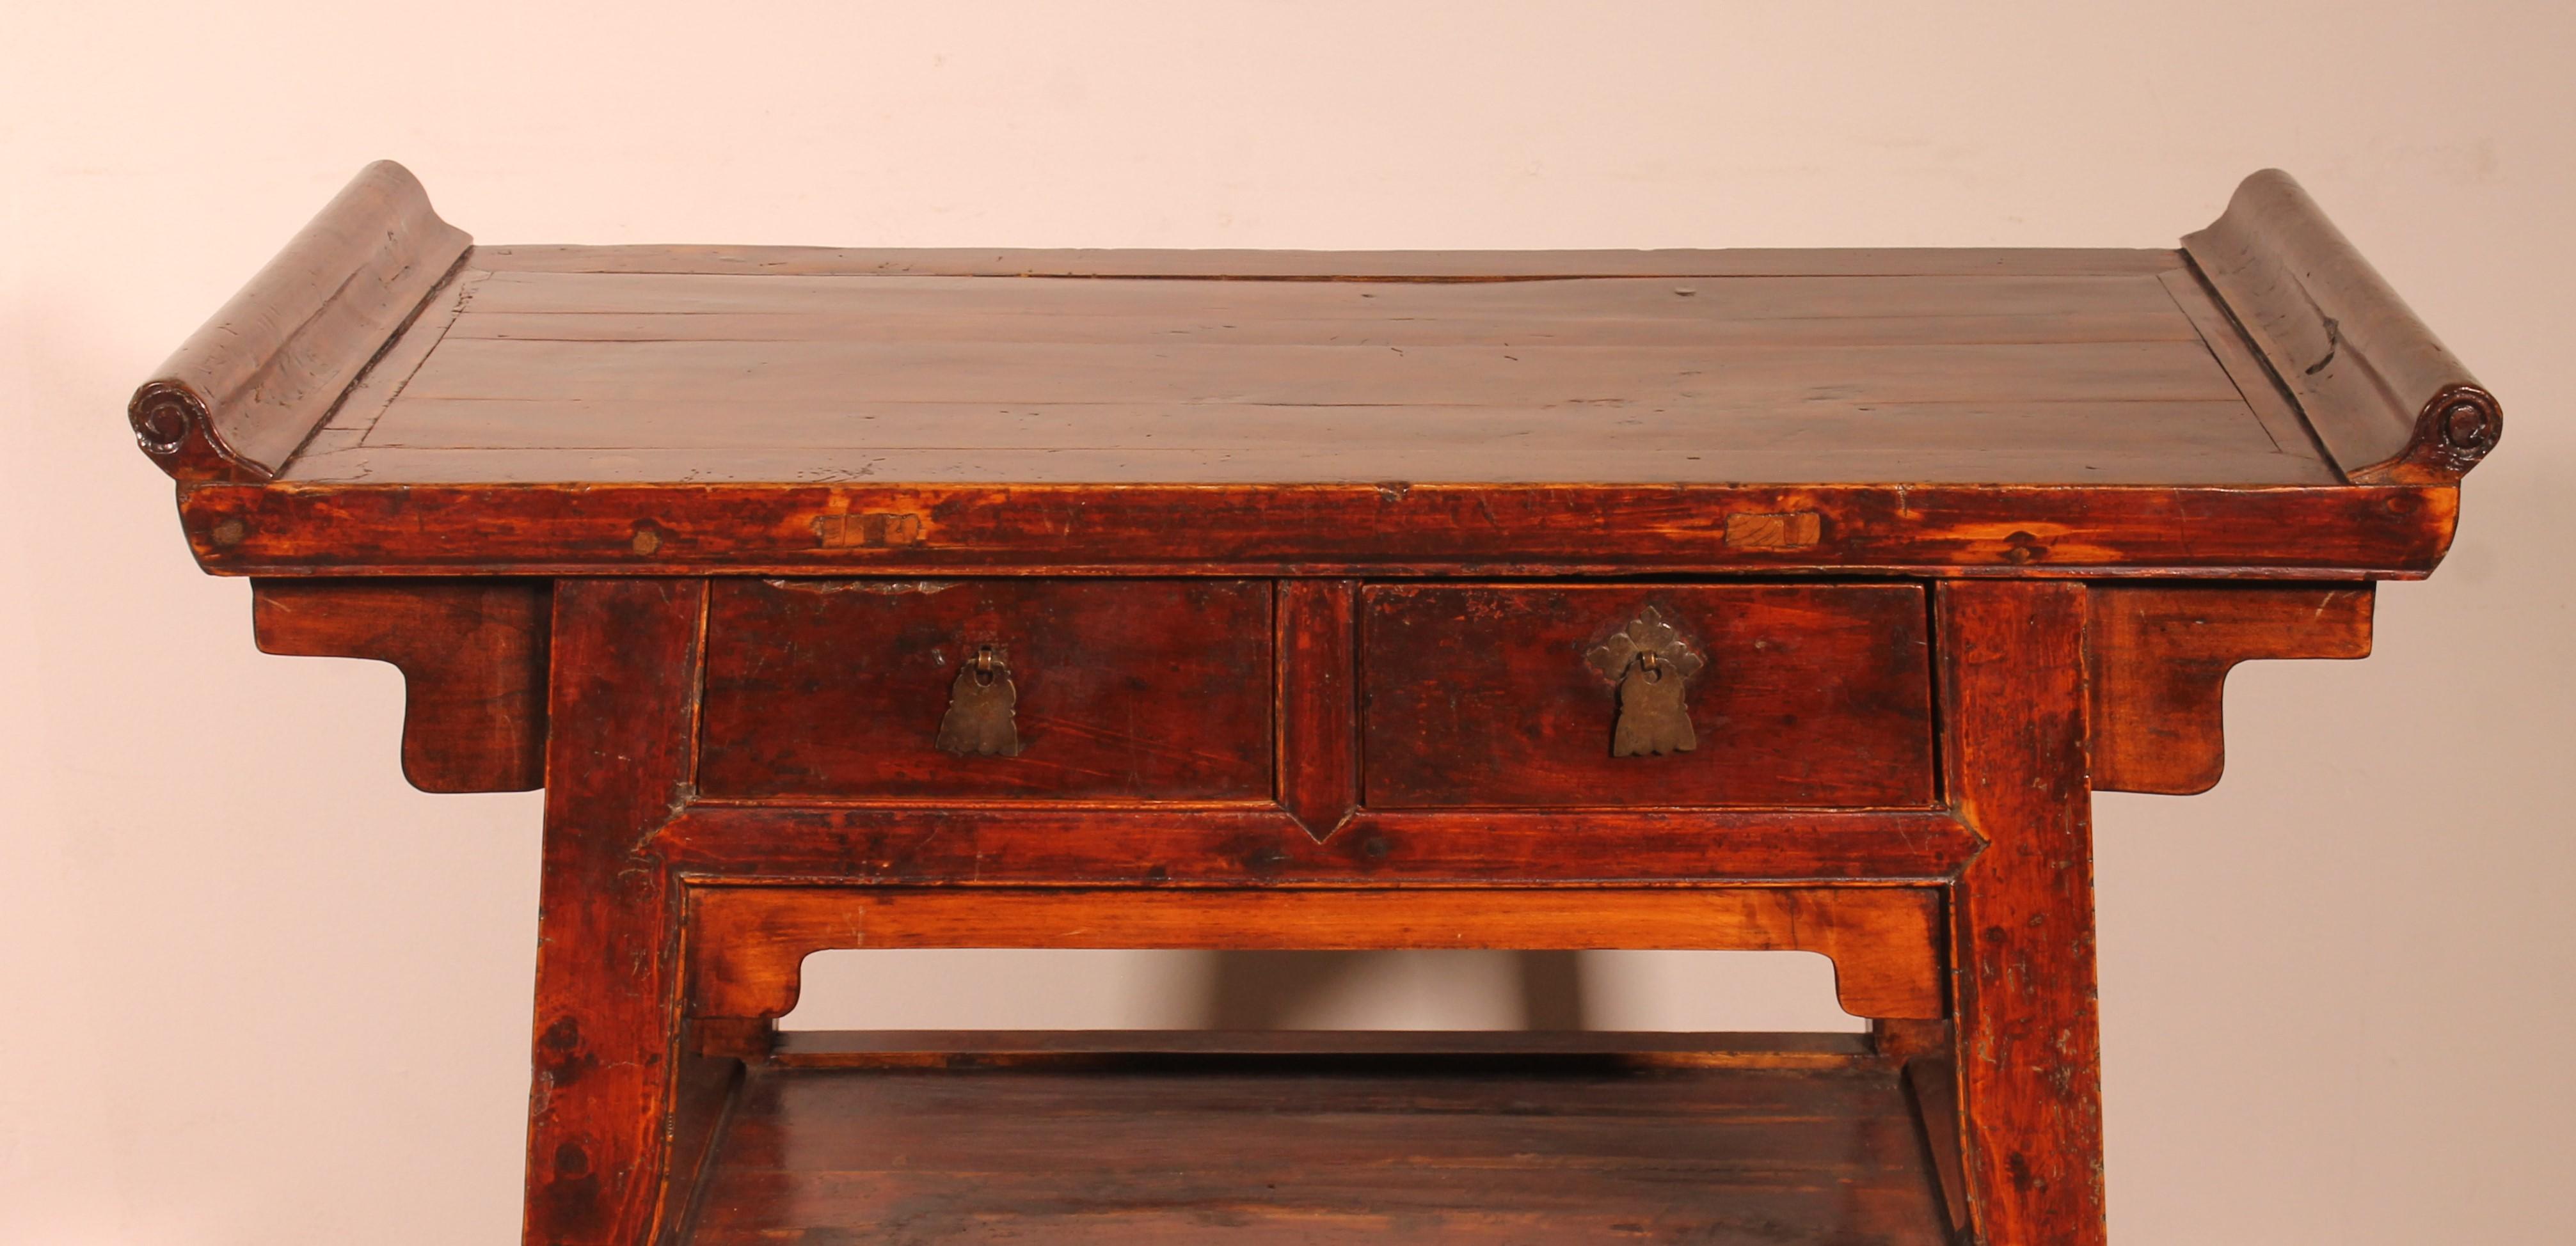 lovely Chinese console from the 19th century
It is made up of two drawers and two small doors.
Ideal as a console, as a bar or occasional table
Very beautiful patina and in superb condition